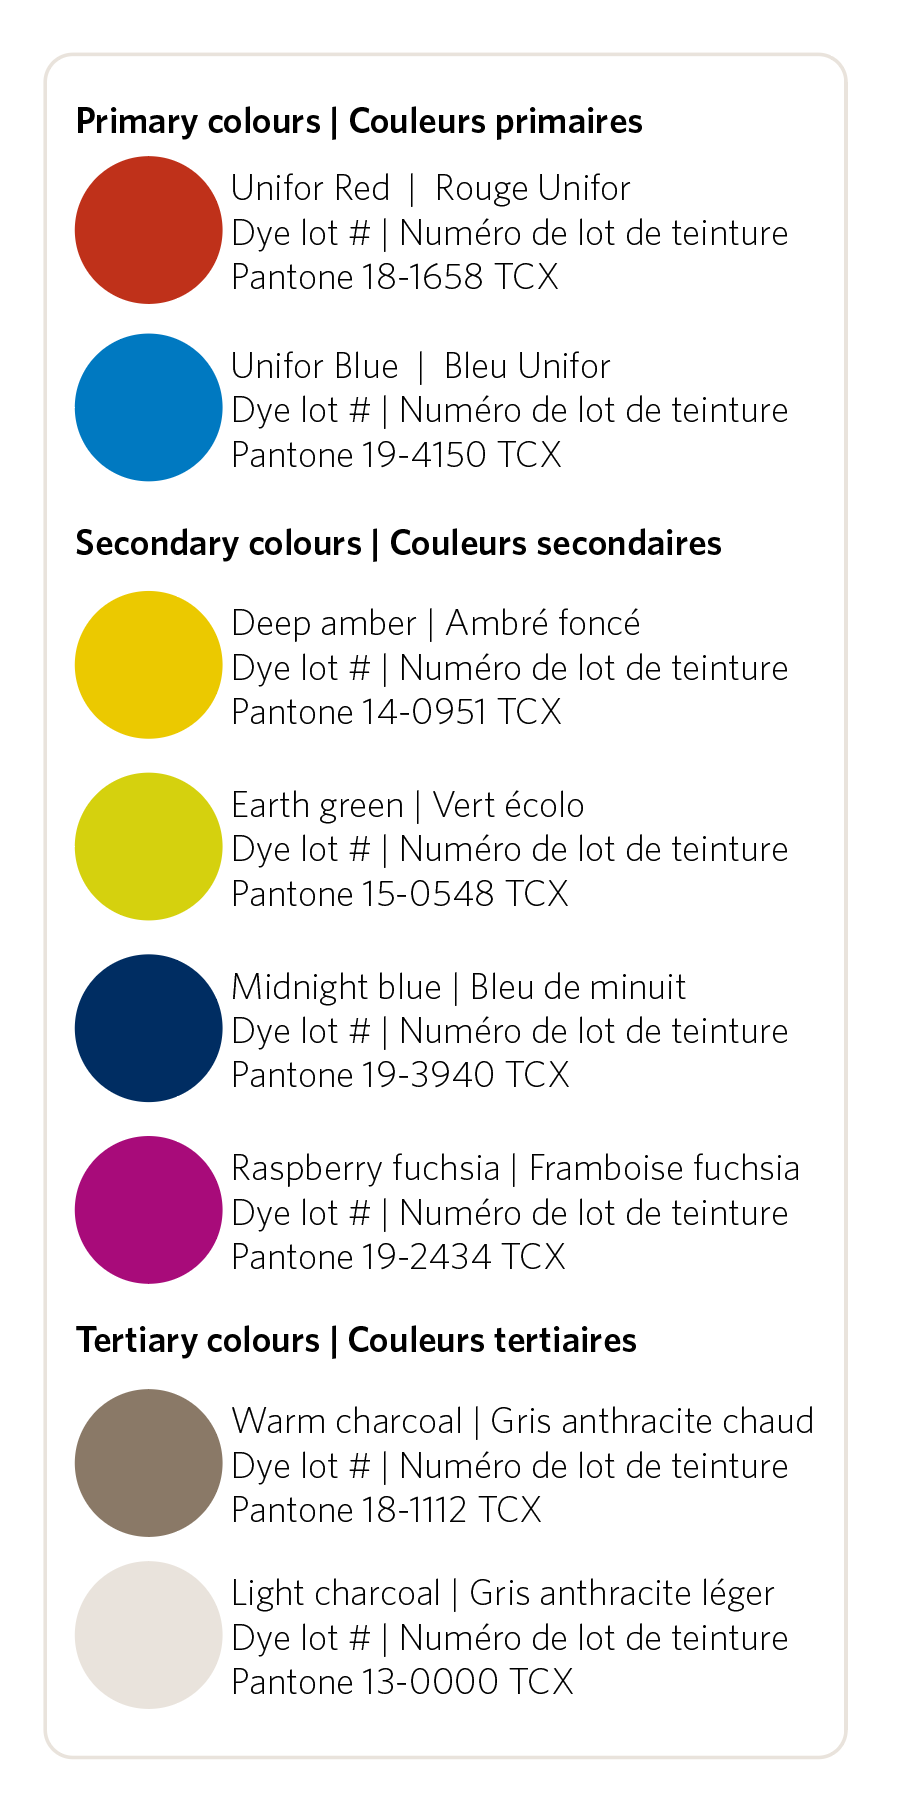 List of textile colours in the Unifor identity